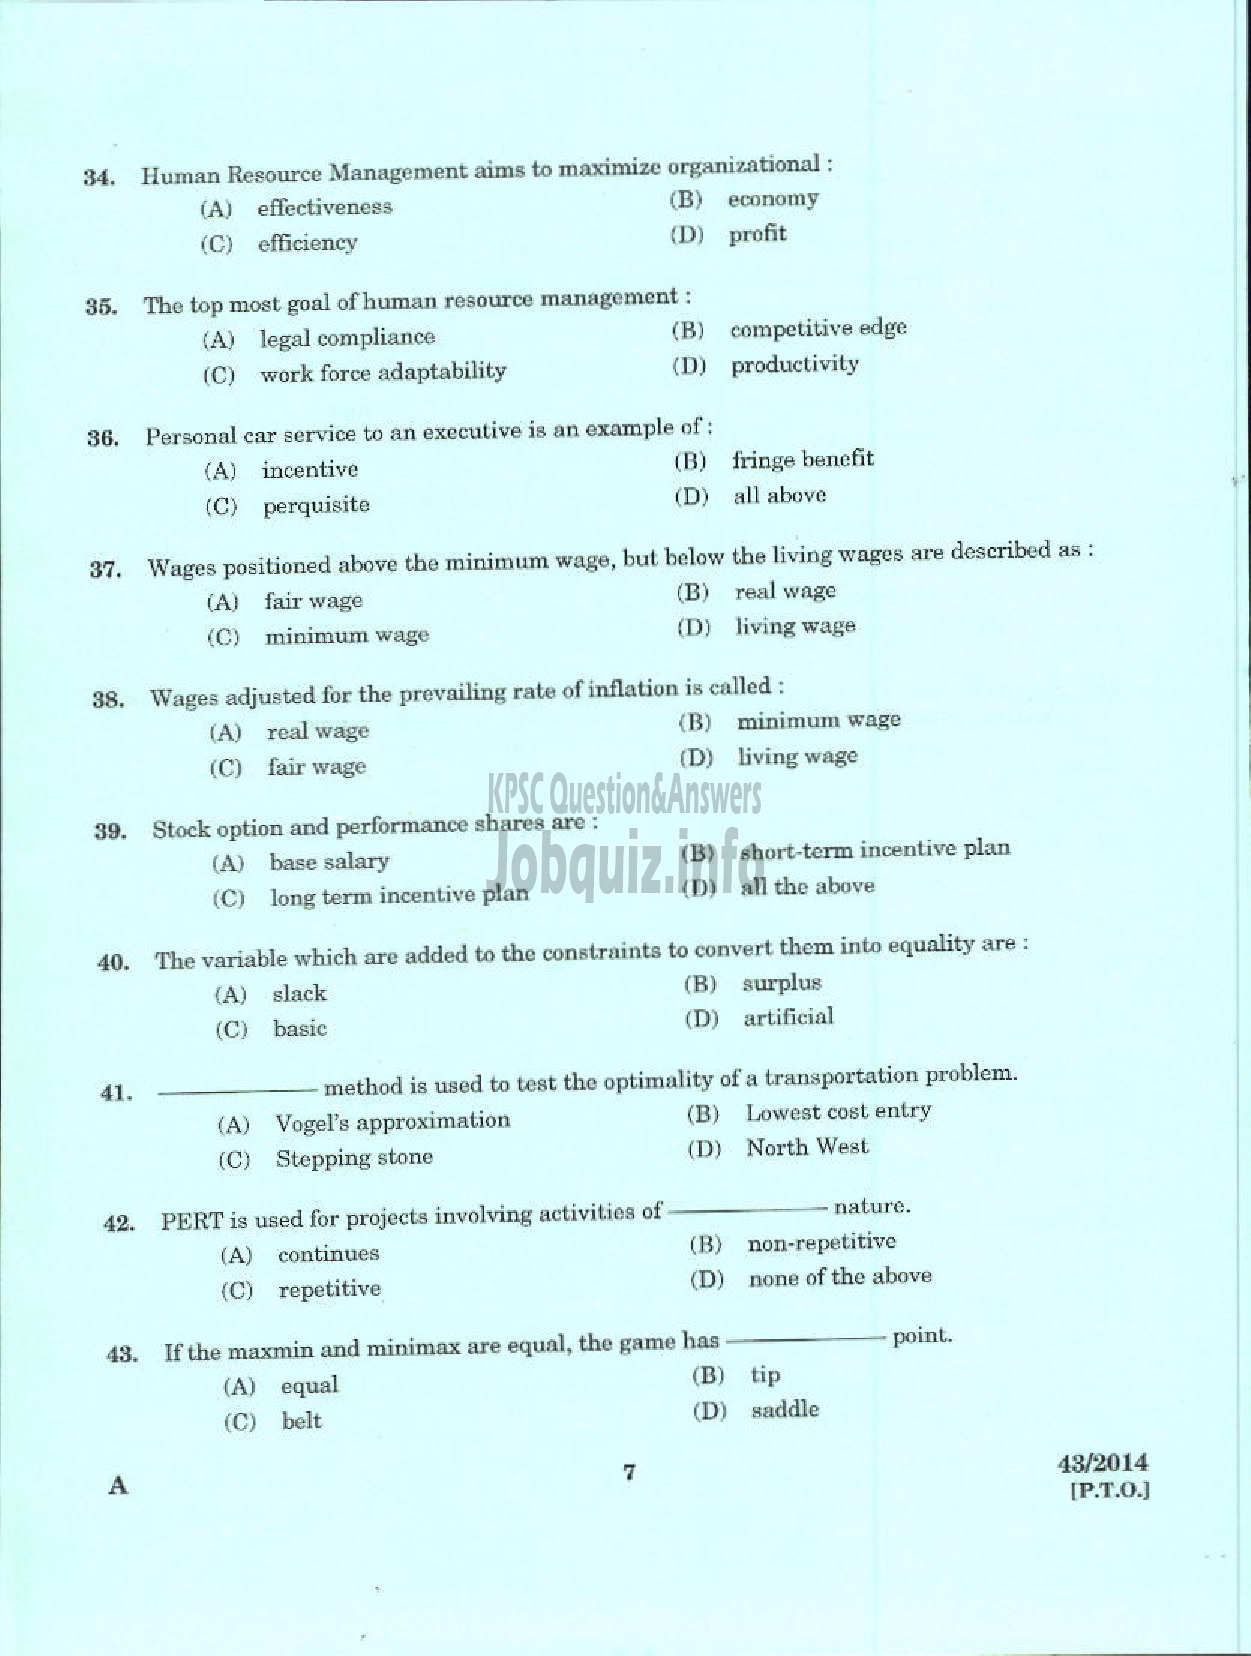 Kerala PSC Question Paper - DEPUTY GENERAL MANAGER DCB IDKY AND KSGD PART I AND PART II-5